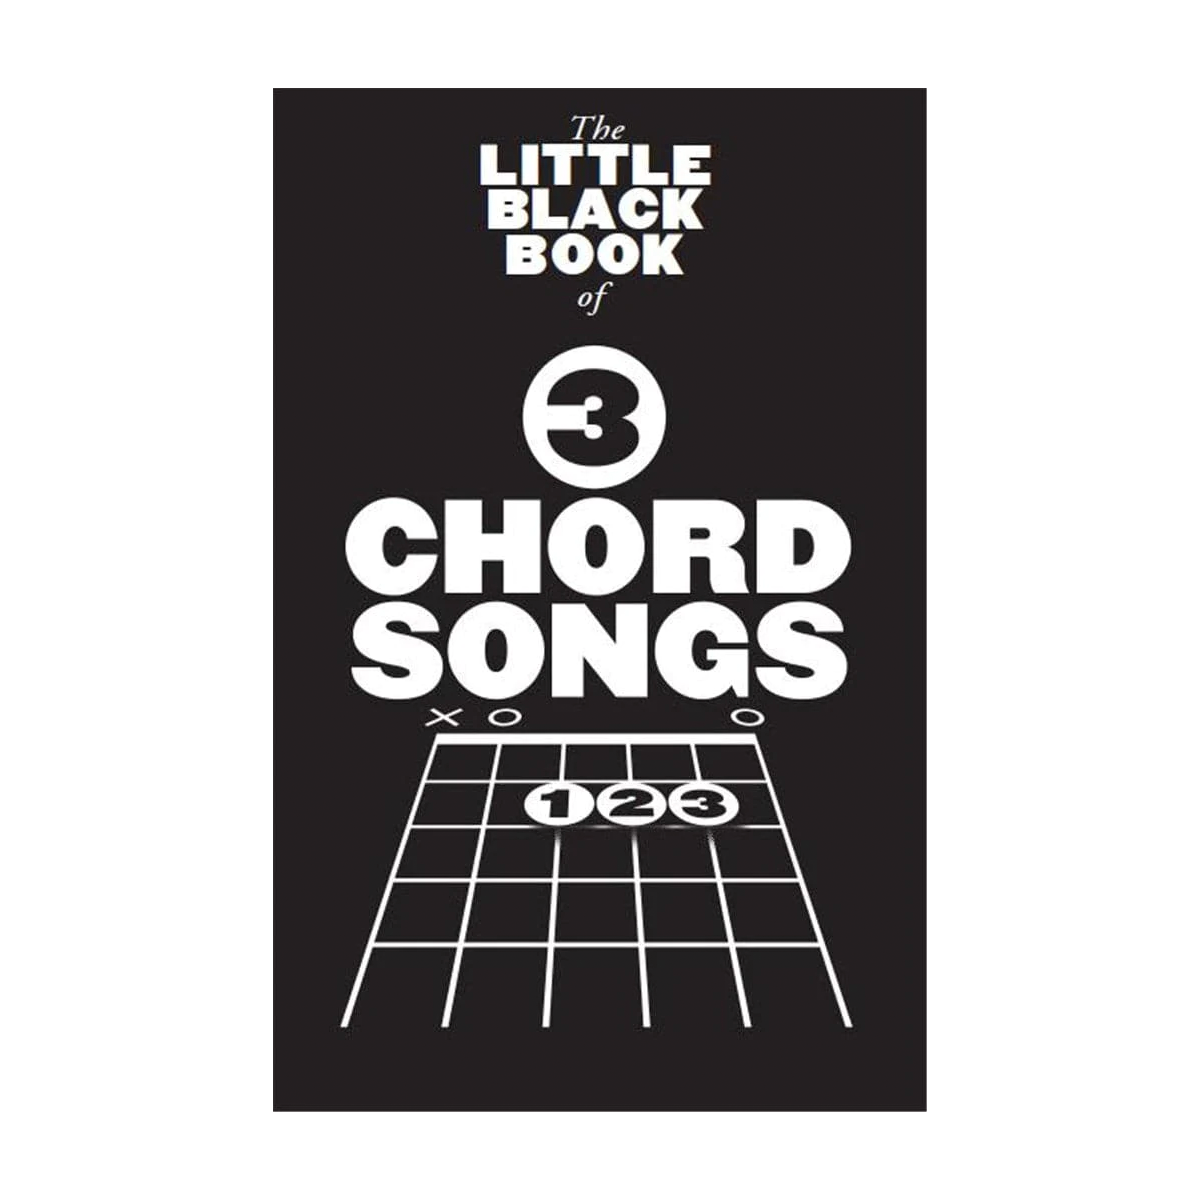 The Little Black Songbook - 3 Chord Songs